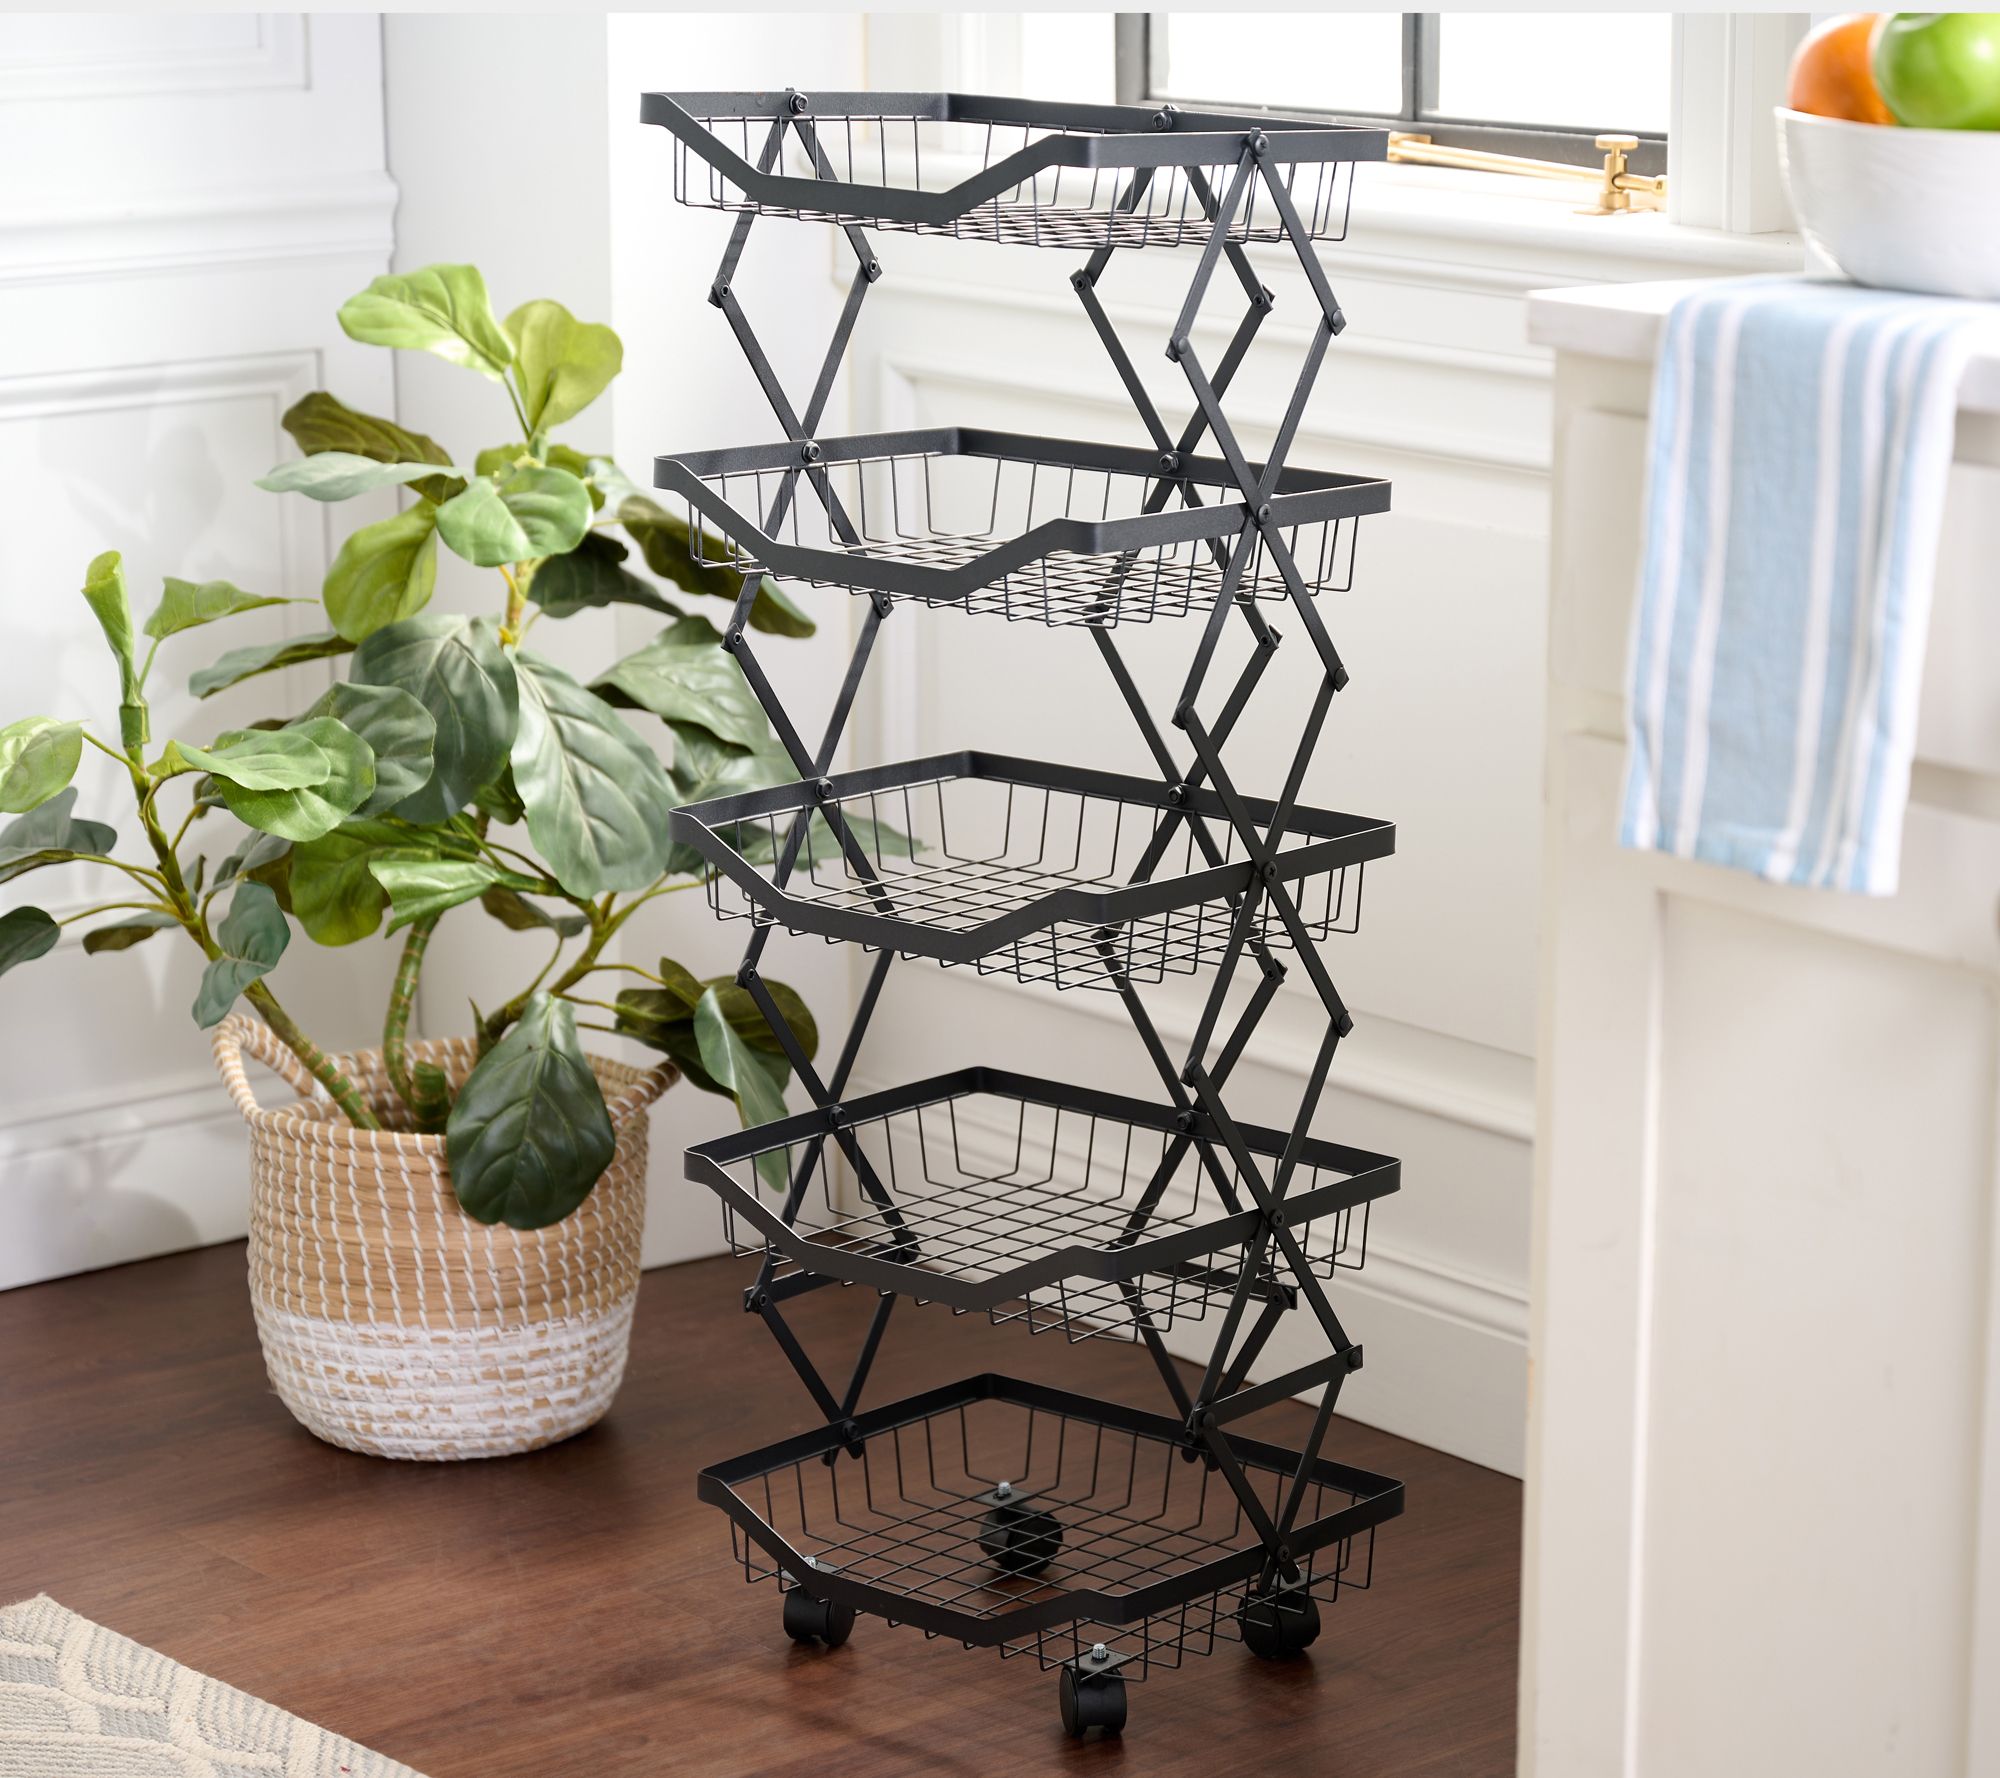 Home 365 5-Tier Collapsible All-Purpose Rack w/ Wheels 